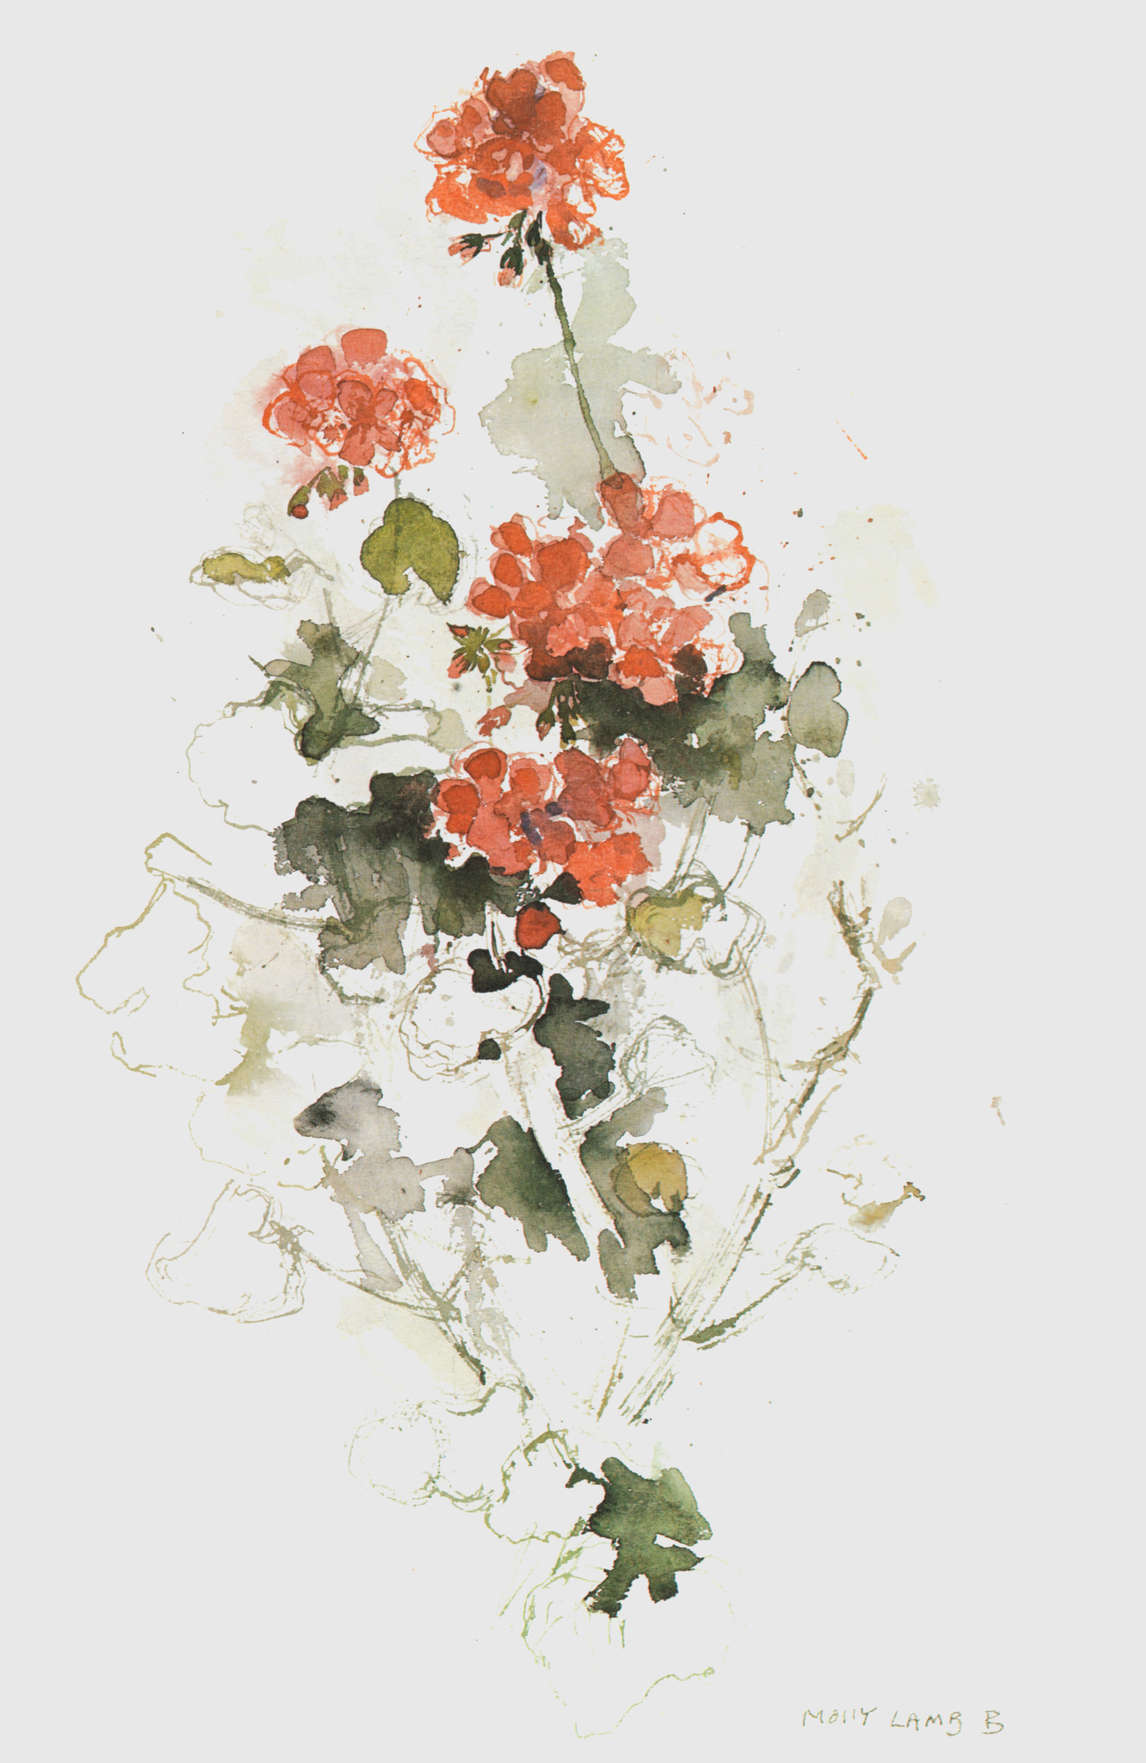 Molly Lamb Bobak, “Geraniums,” from Wild Flowers of Canada: Impressions and Sketches of a Field Artist